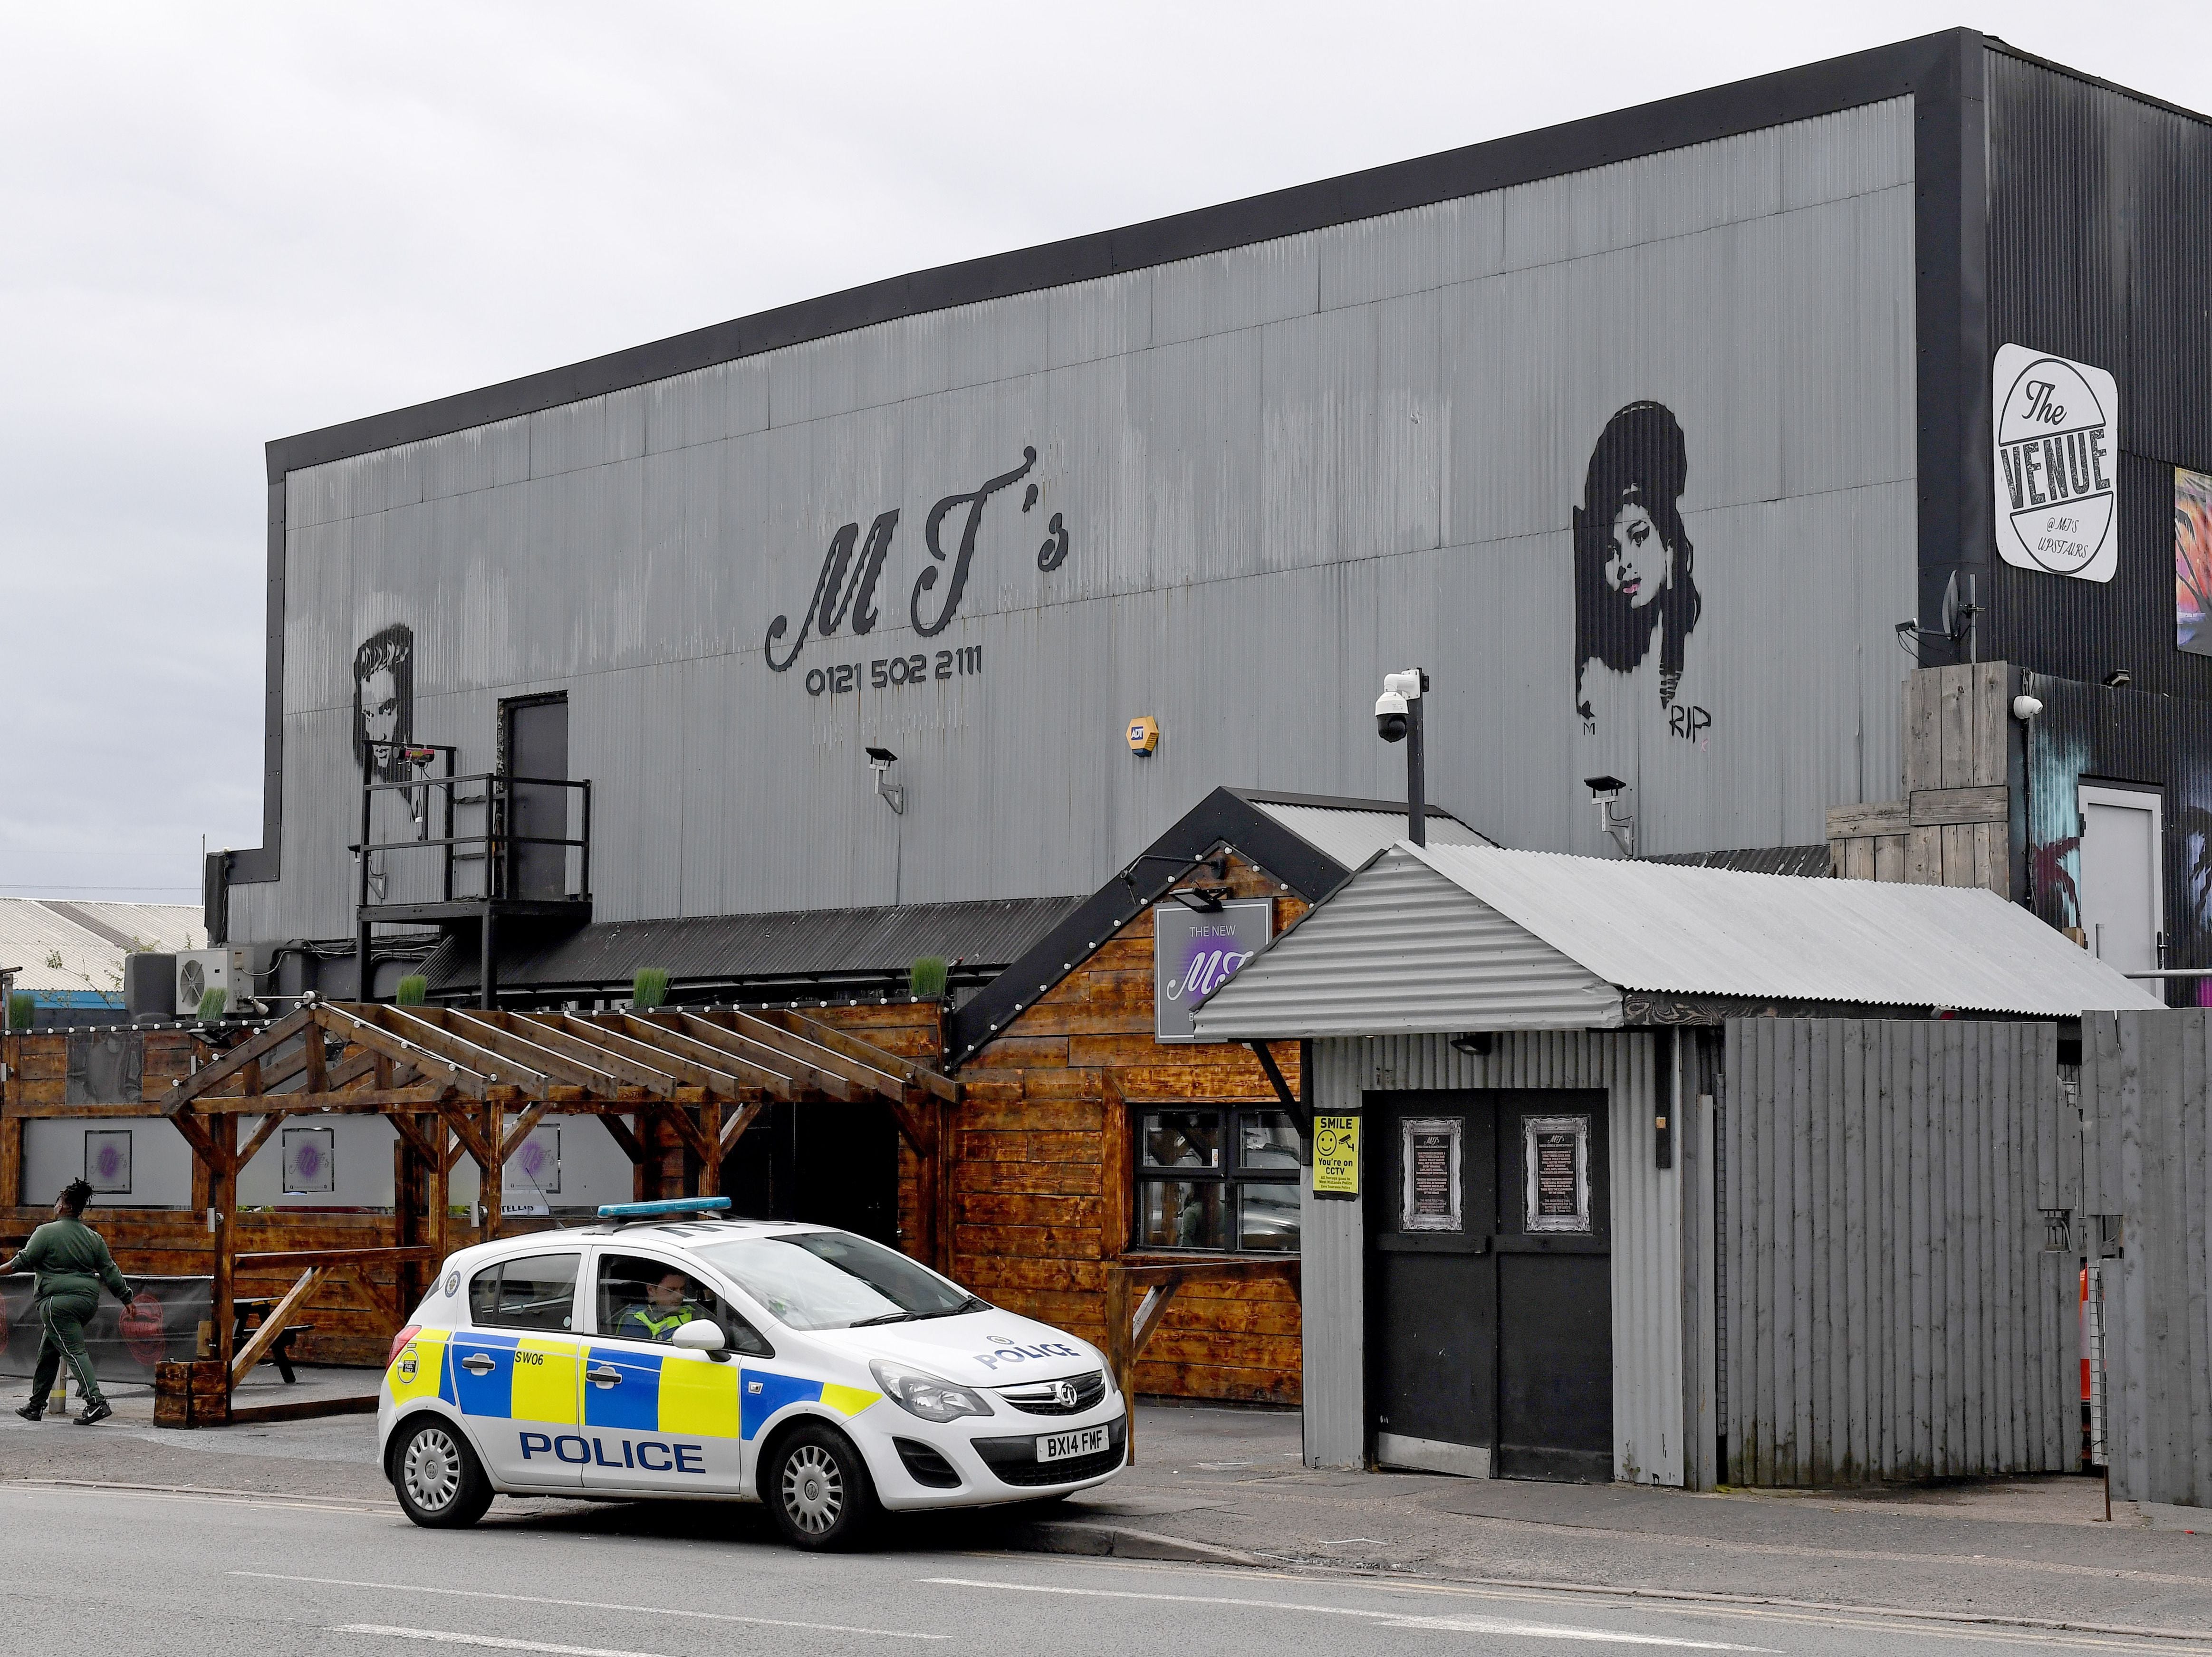 Man charged after shooting in Wednesbury club that left man seriously injured